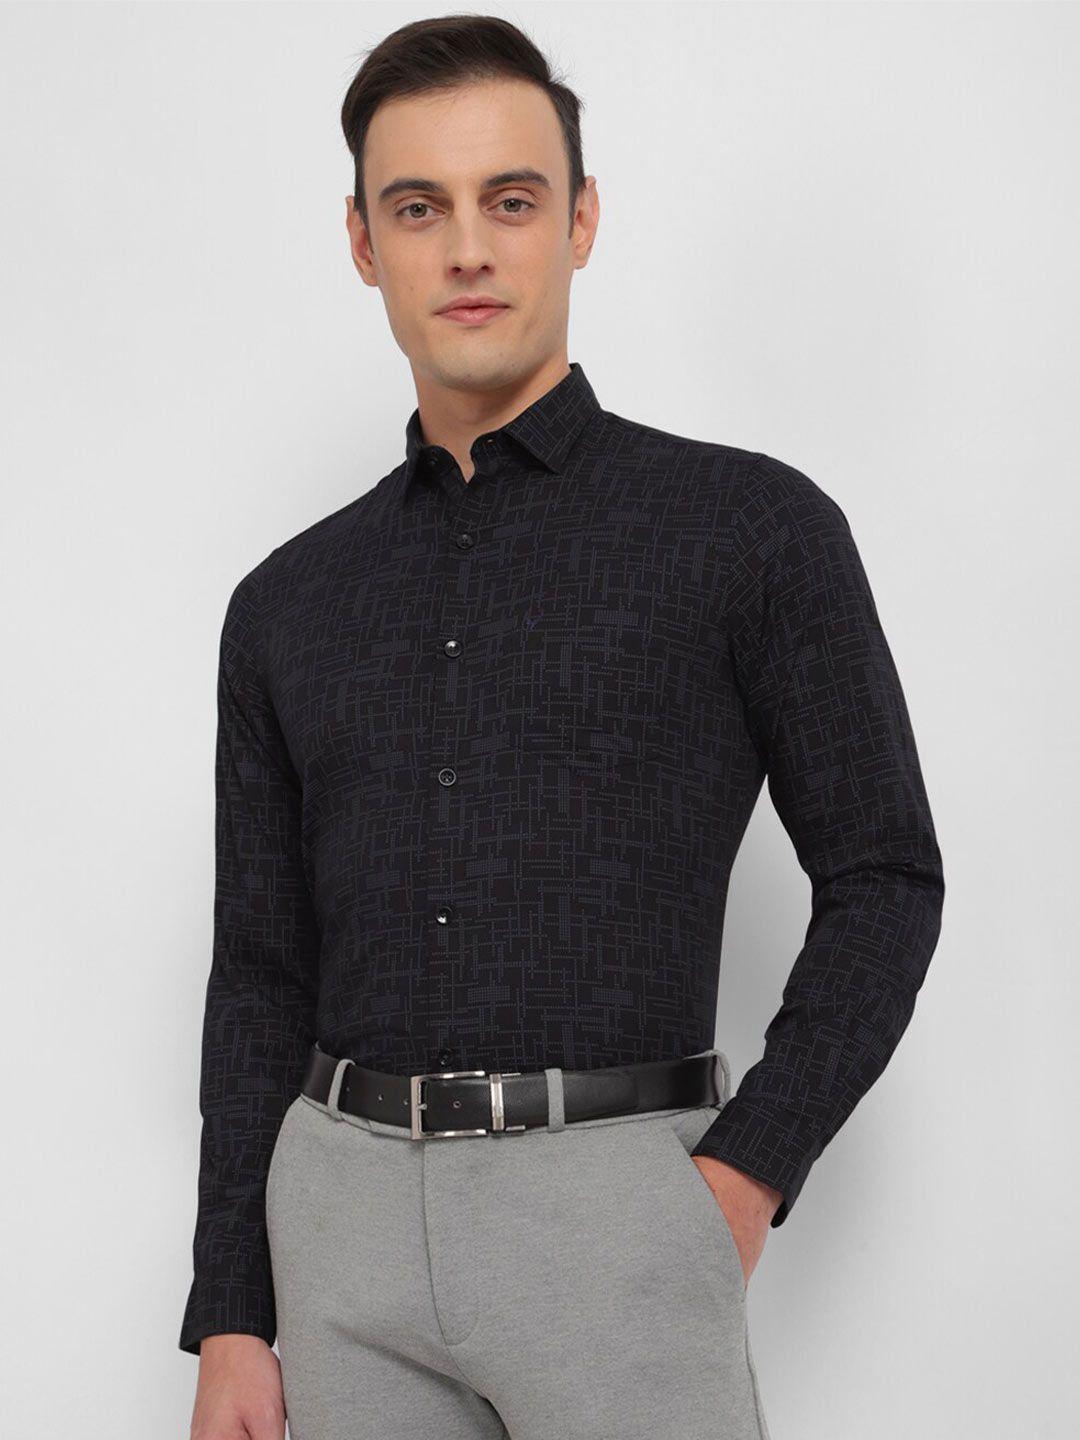 allen solly geometric printed slim fit cotton formal shirt